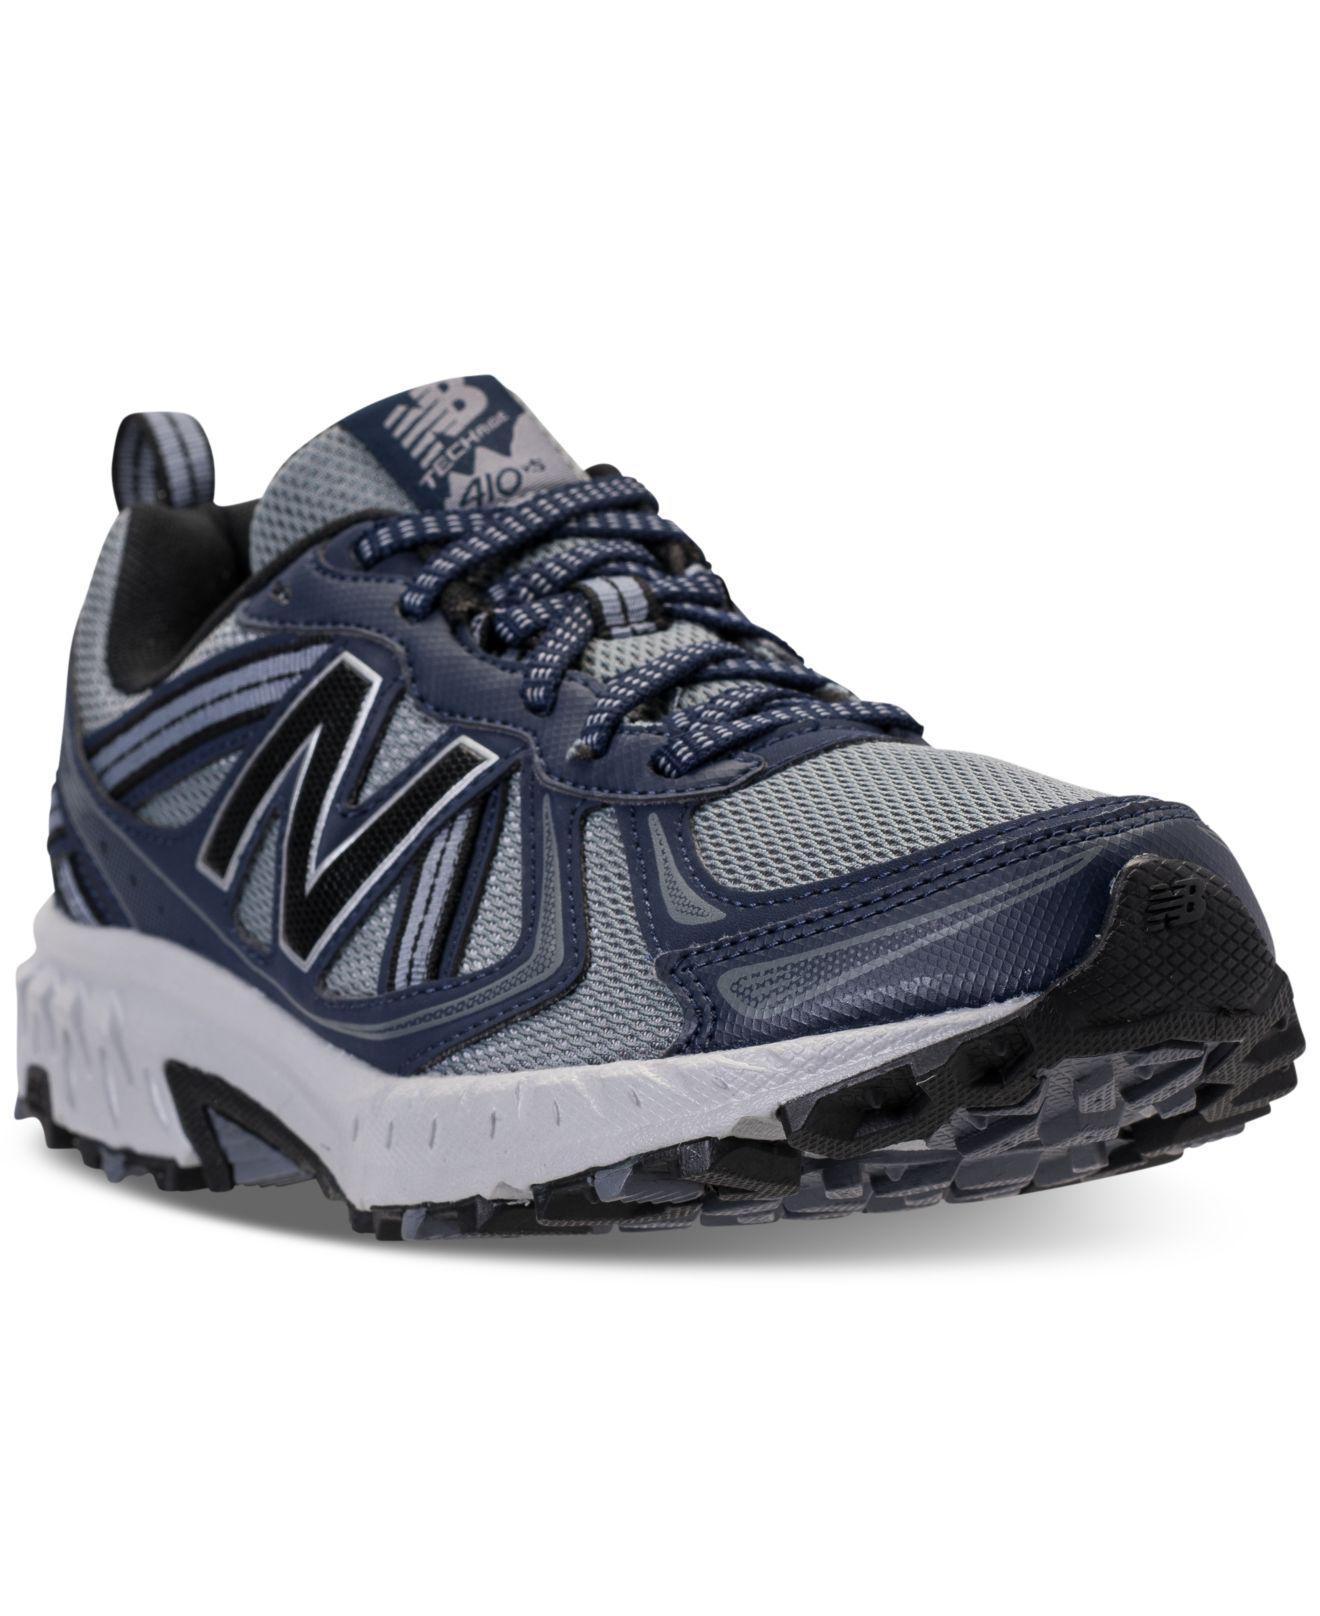 Lyst - New Balance Men's Mt410 V5 Running Sneakers From Finish Line in ...